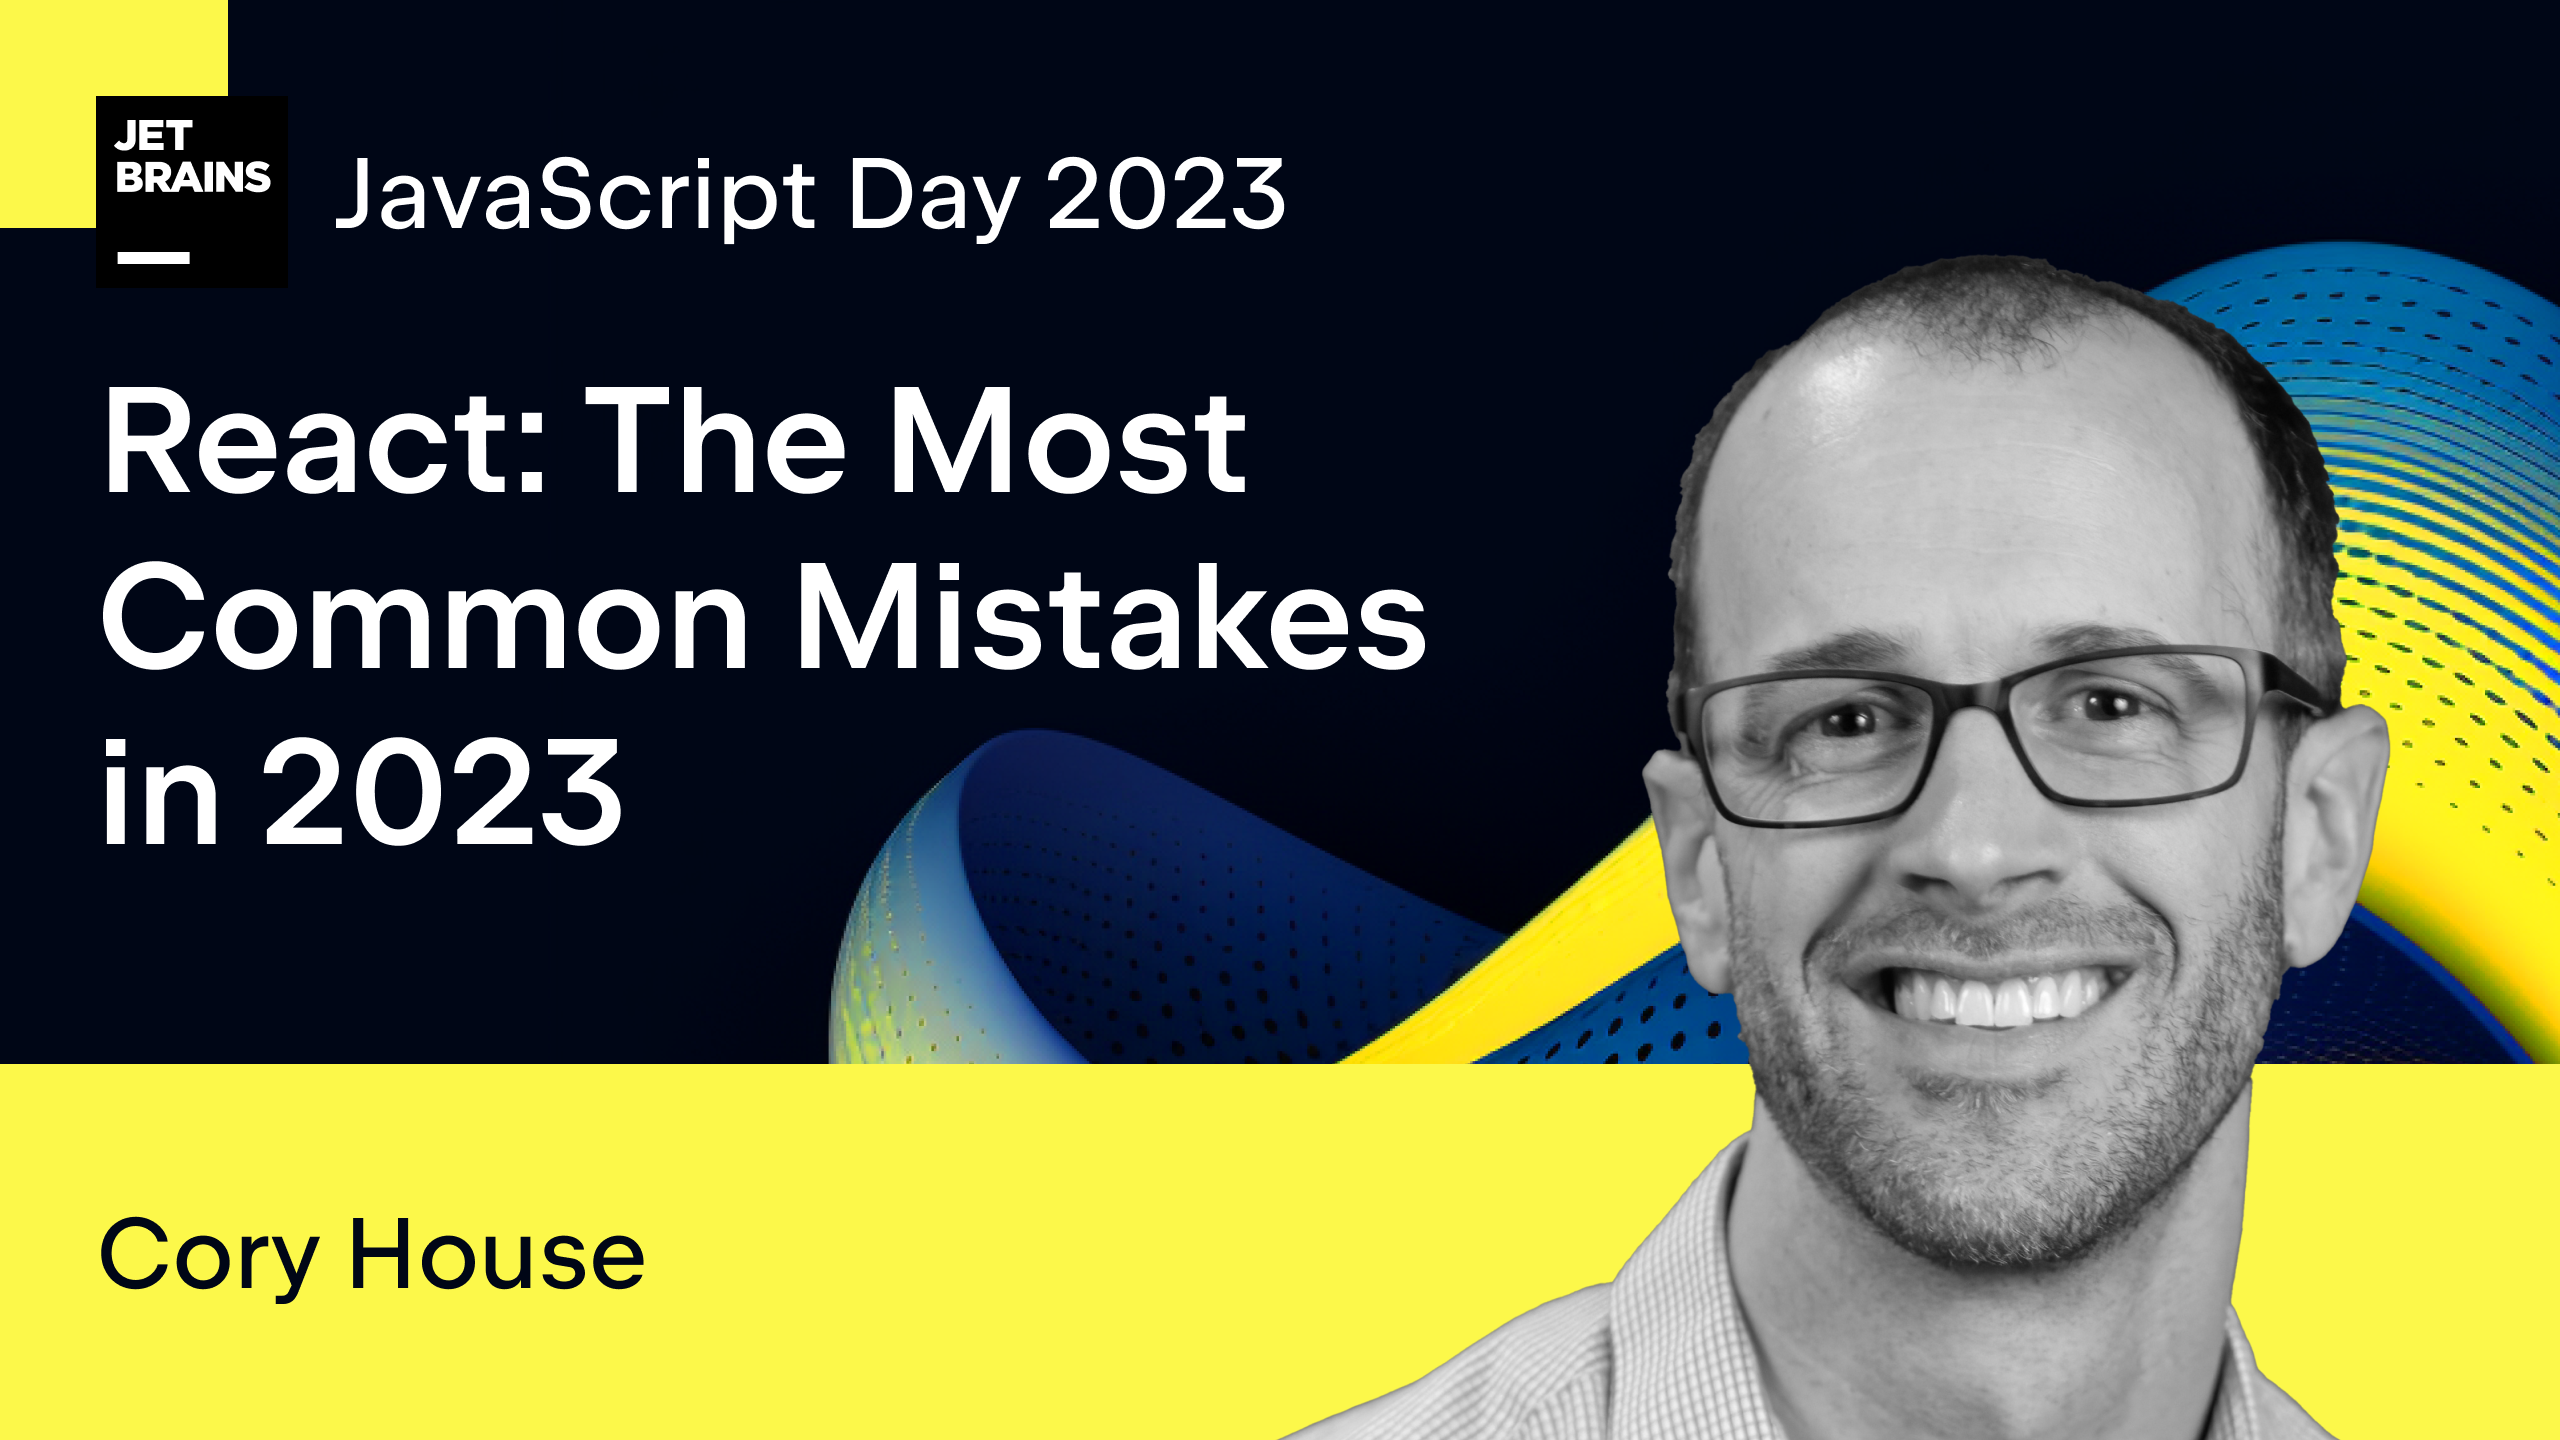 React: The Most Common Mistakes in 2023